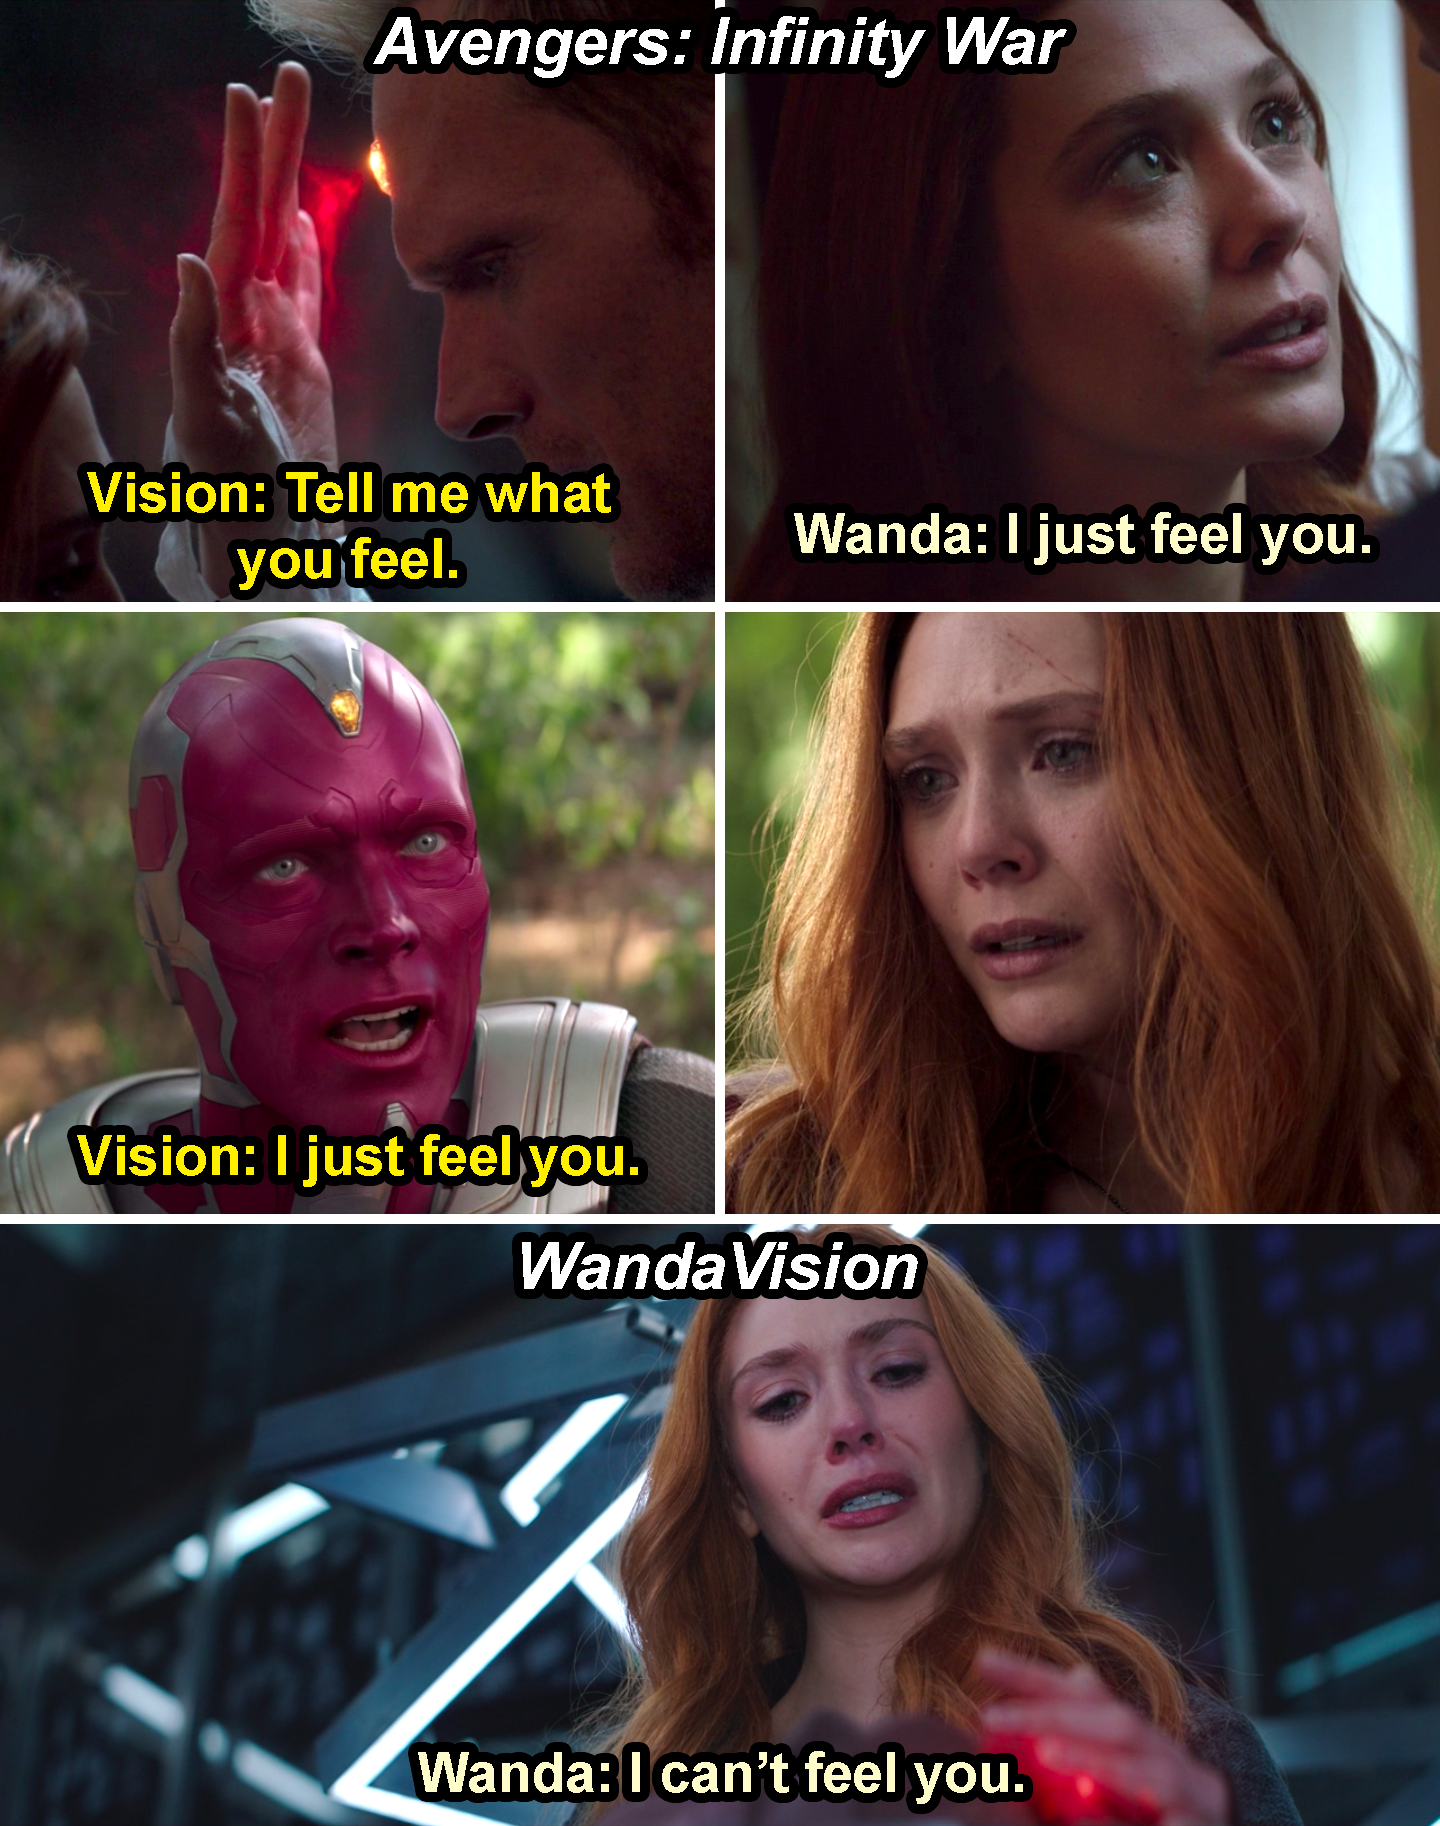 Wanda saying, &quot;I just feel you,&quot; as she probes the mind stone and Vision saying it back to her later in Infinity War and Wanda saying, &quot;I can&#x27;t feel you,&quot; in WandaVision